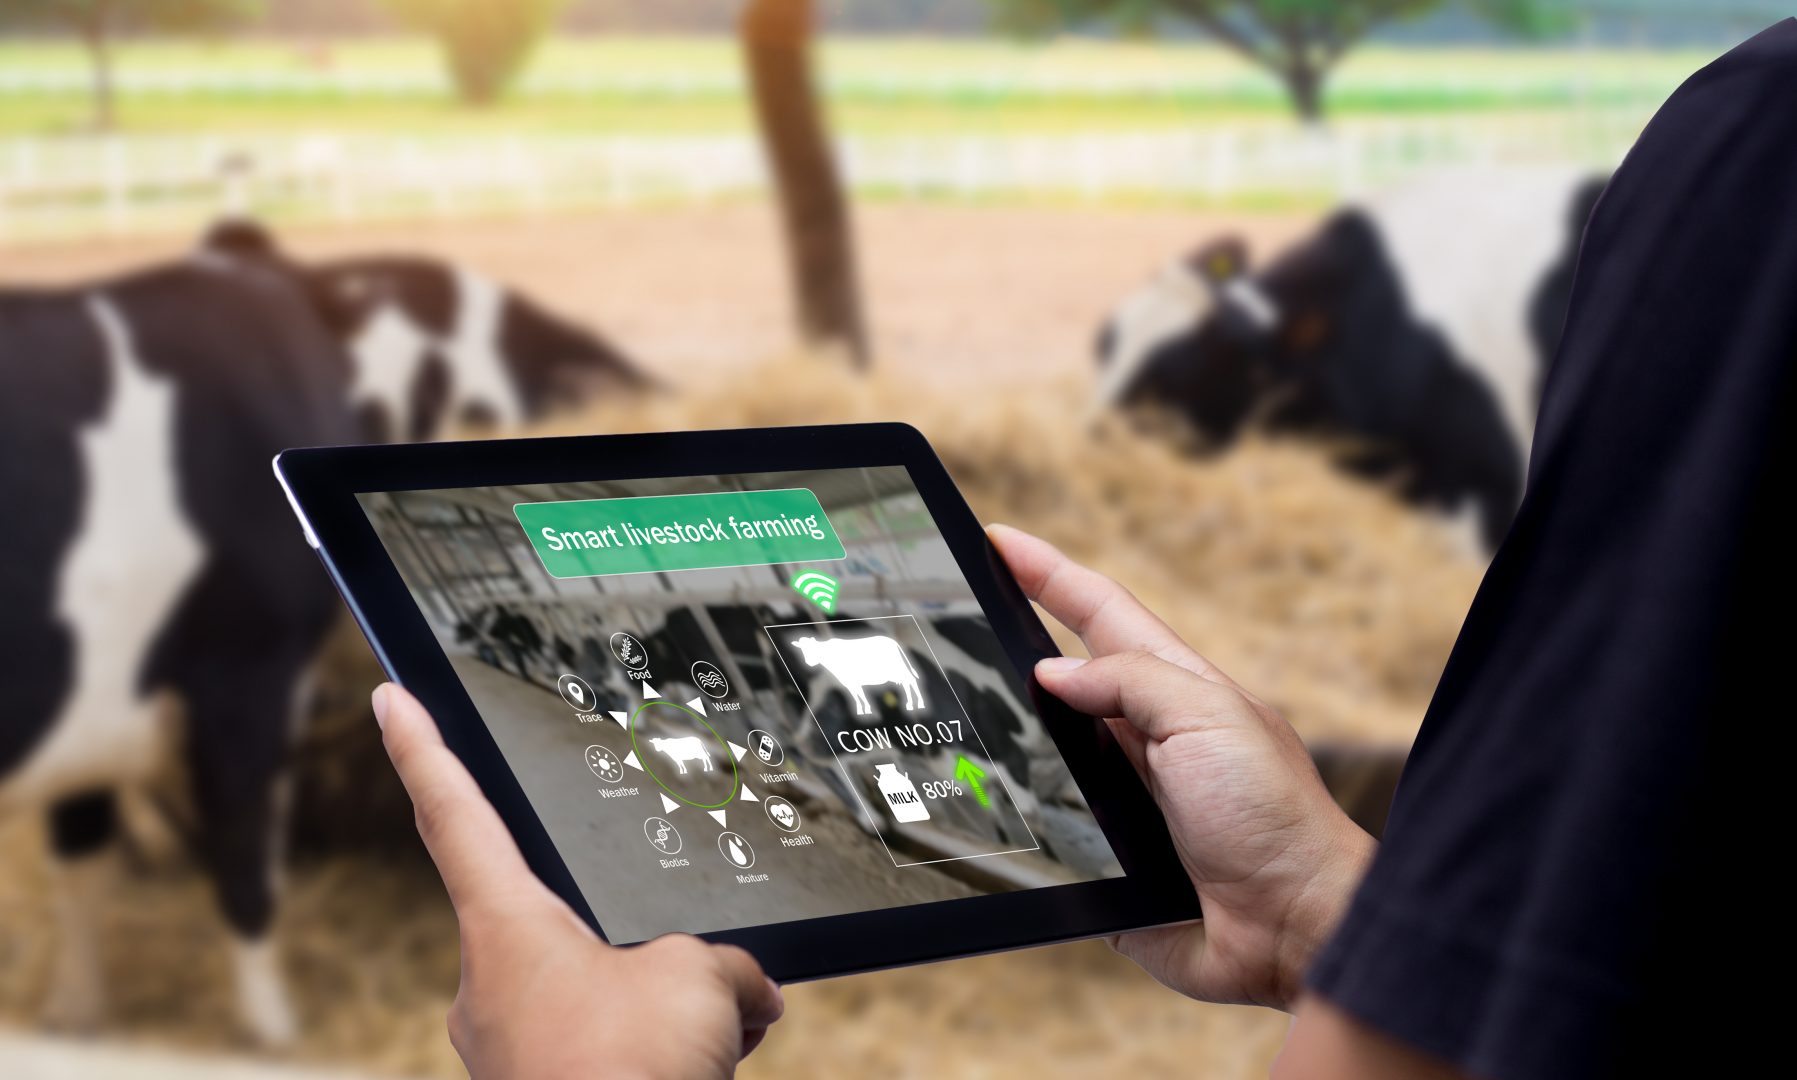 smart farmer using TeamViewer IoT agriculture software on digital tablet to control dairy cows livestock